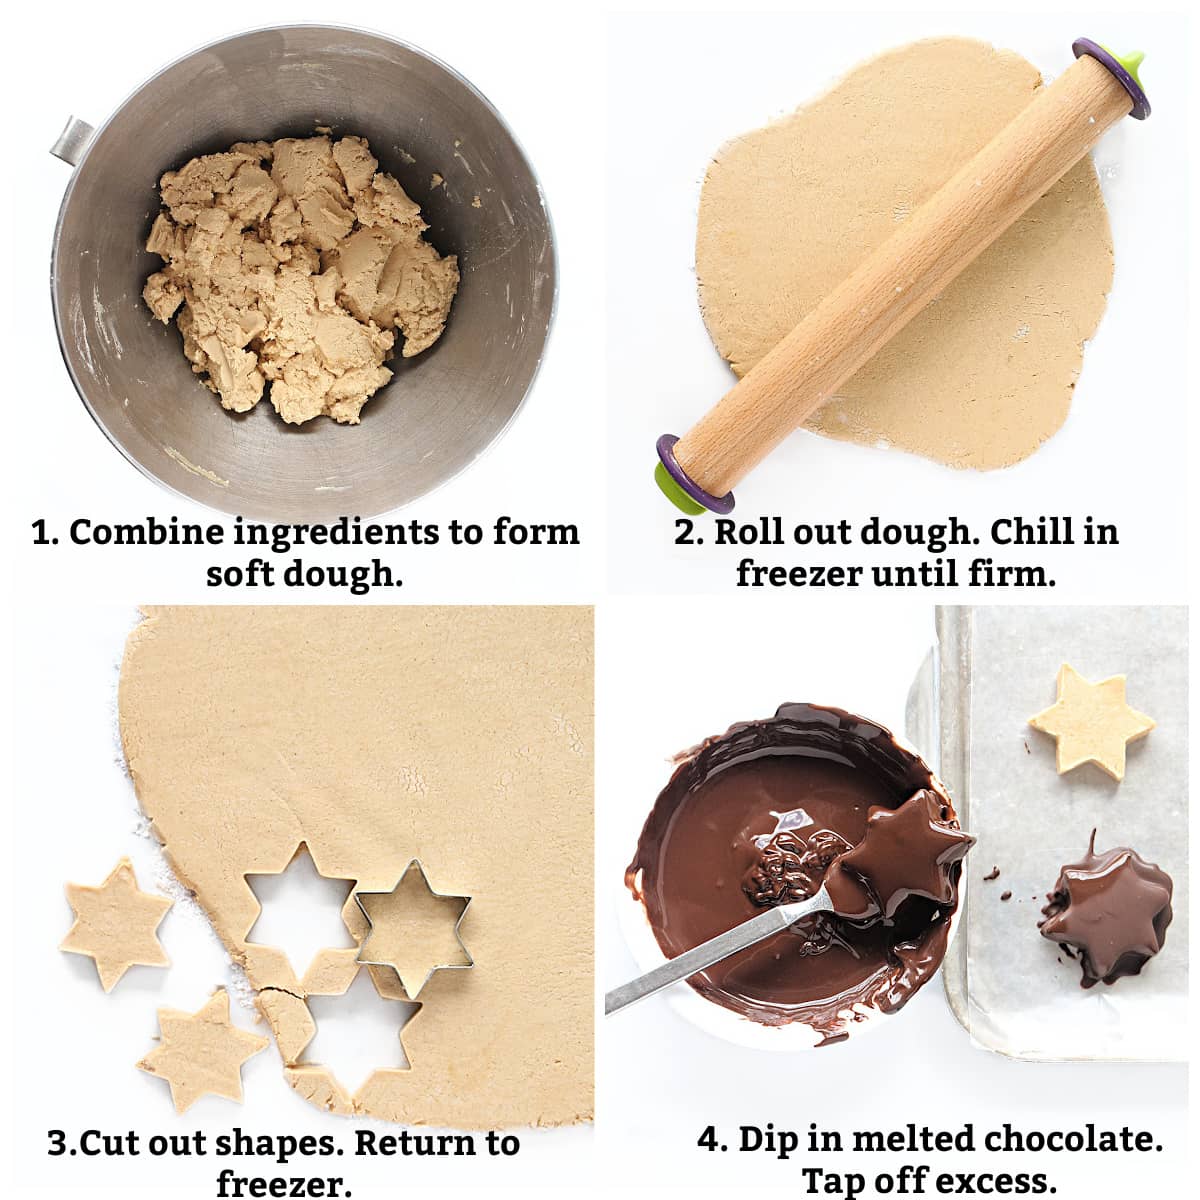 Instructions: combine ingredients, roll out, chill, cutout shapes, dip in melted chocolate..